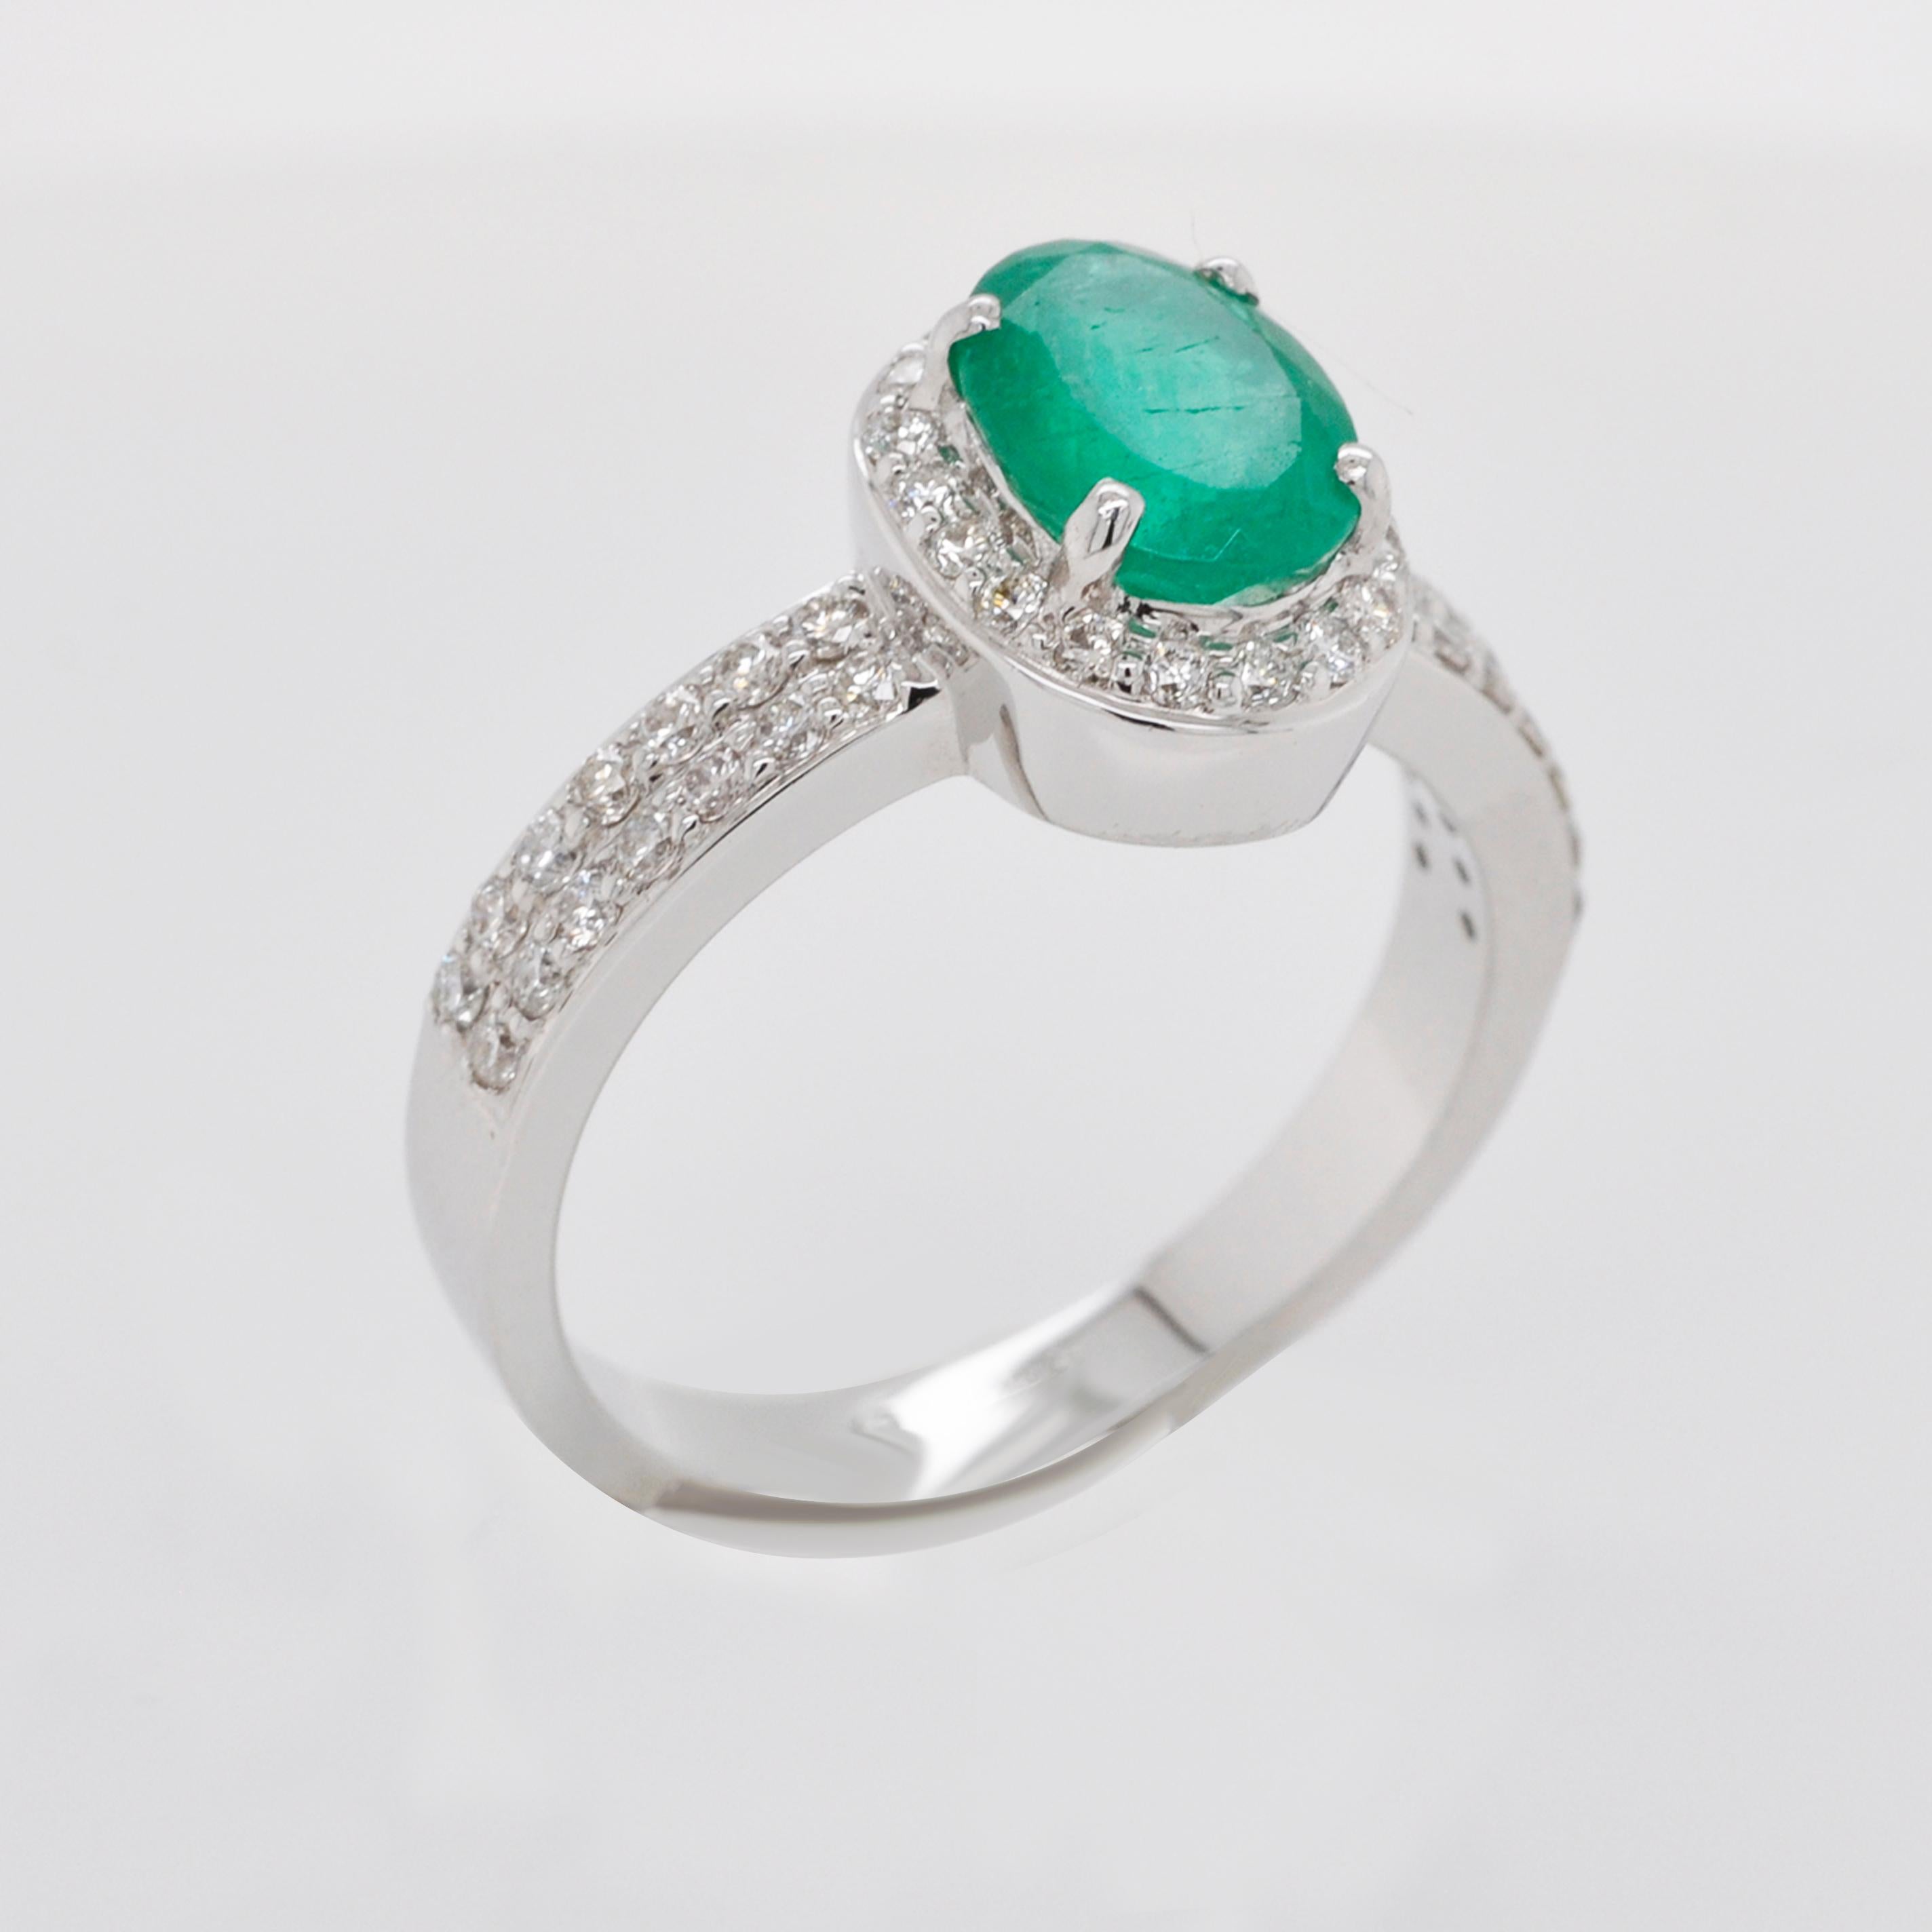 18 Karat White Gold 8.4x6.4 mm Oval Colombian Emerald Diamond Contemporary Ring For Sale 6